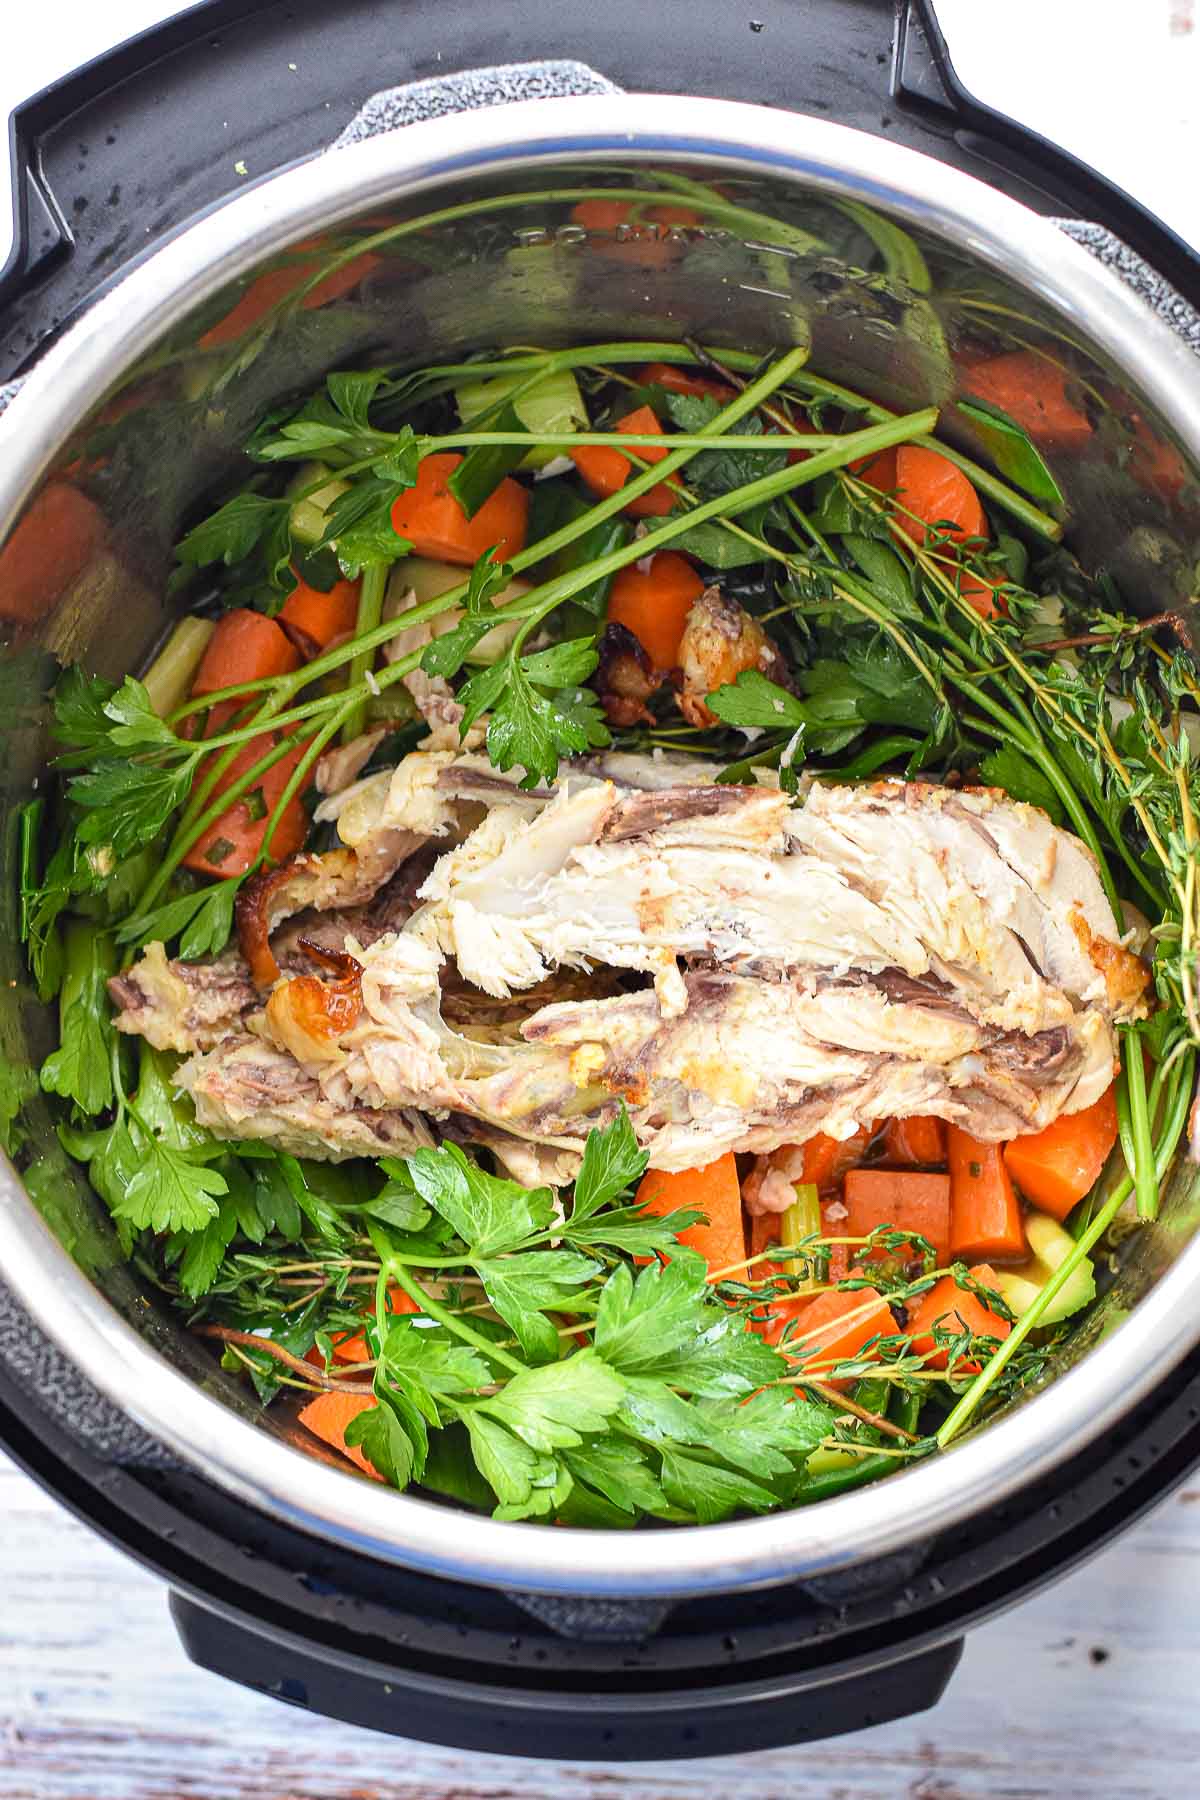 a chicken carcass surrounded by parsley and thyme sprigs on top of sauteed veggies in an instant pot prior to being covered with water and cooking.